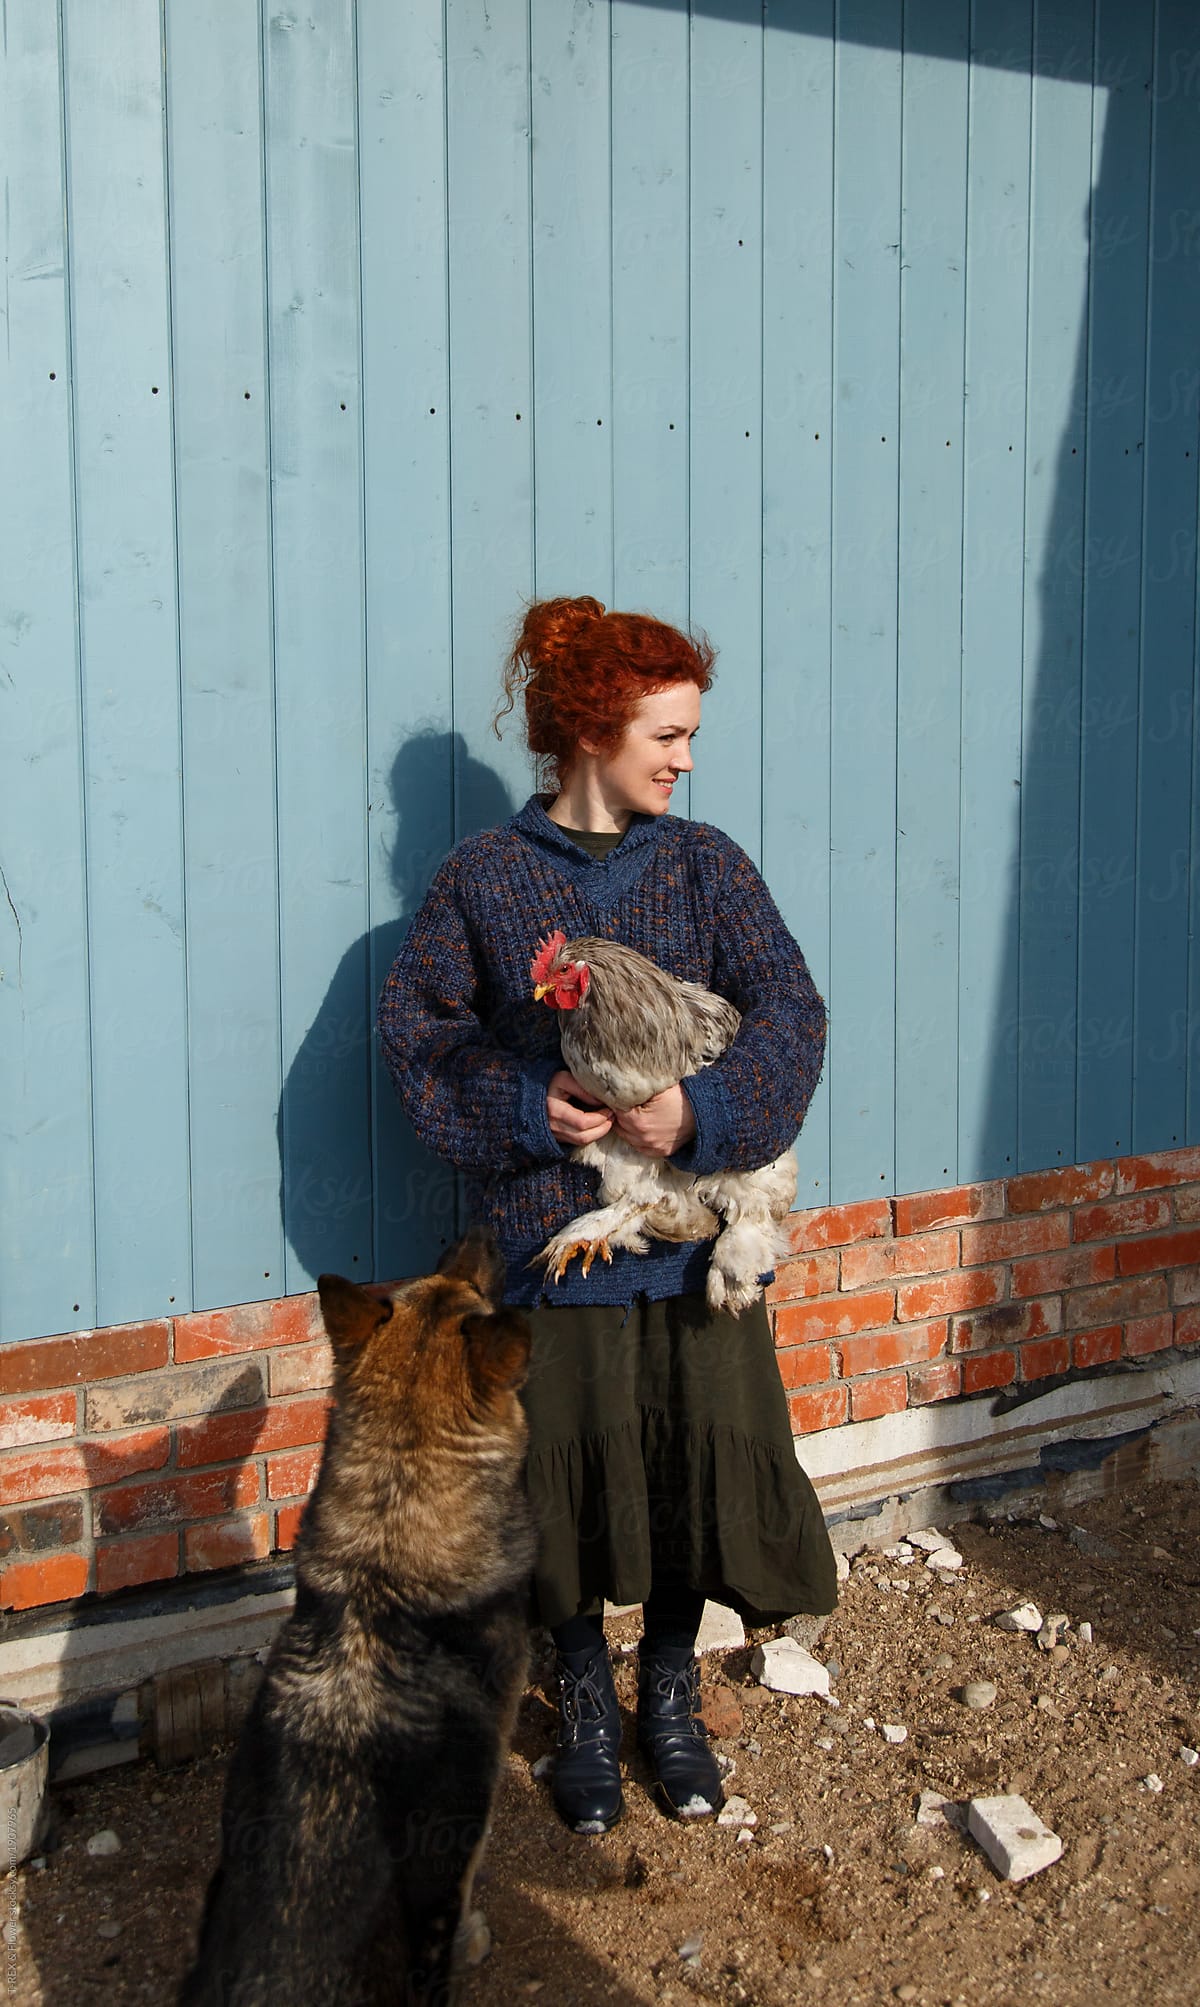 Redhead country woman with pets